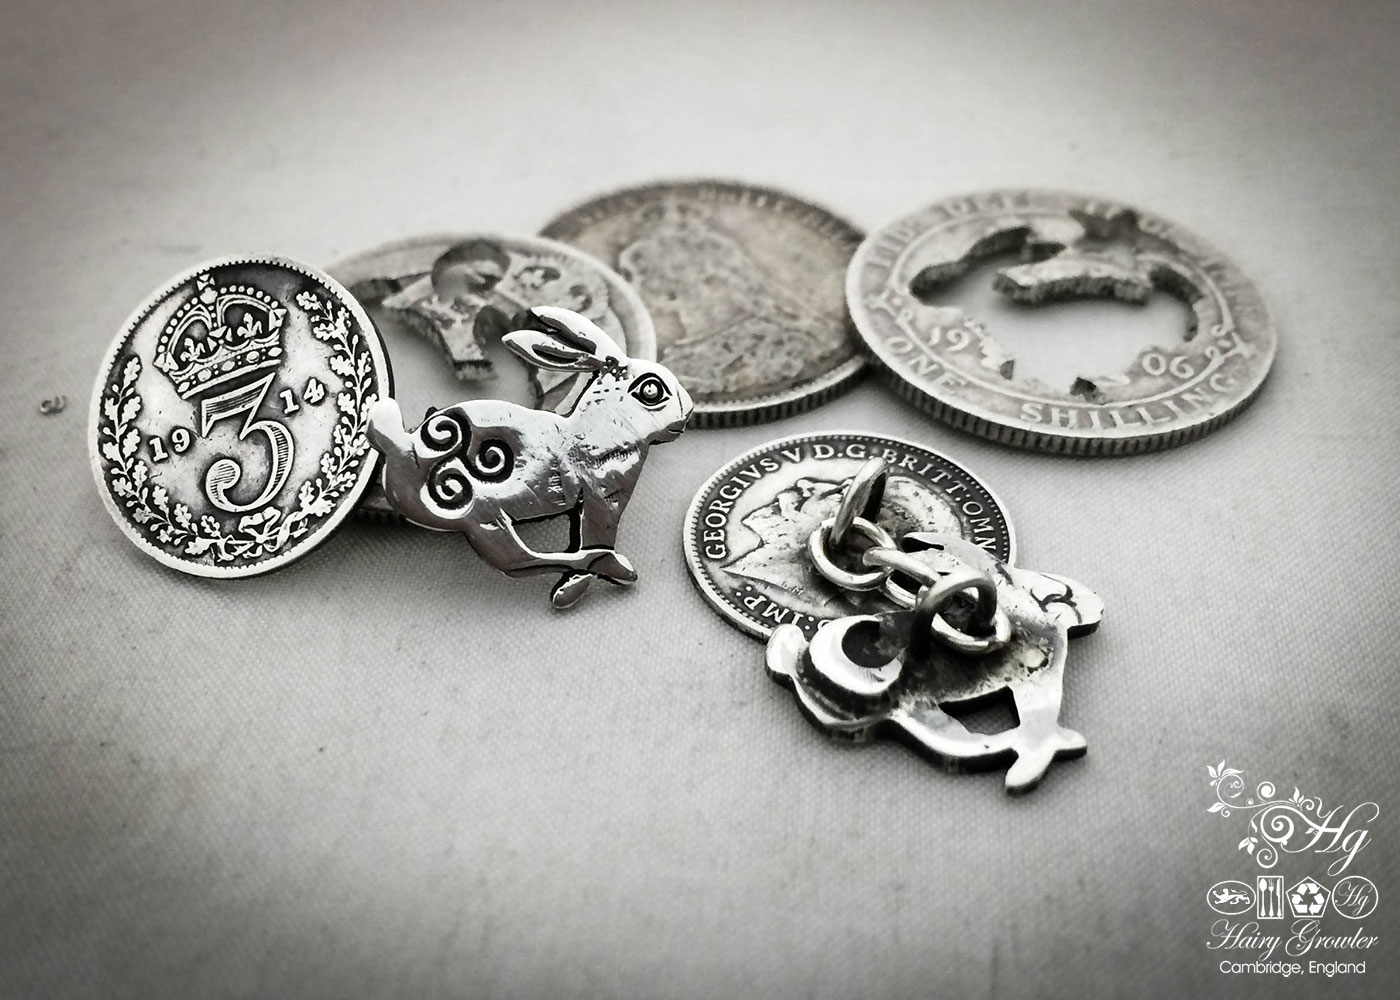 March hare cufflinks handcrafted and recycled from sterling silver shillings and threepence coins